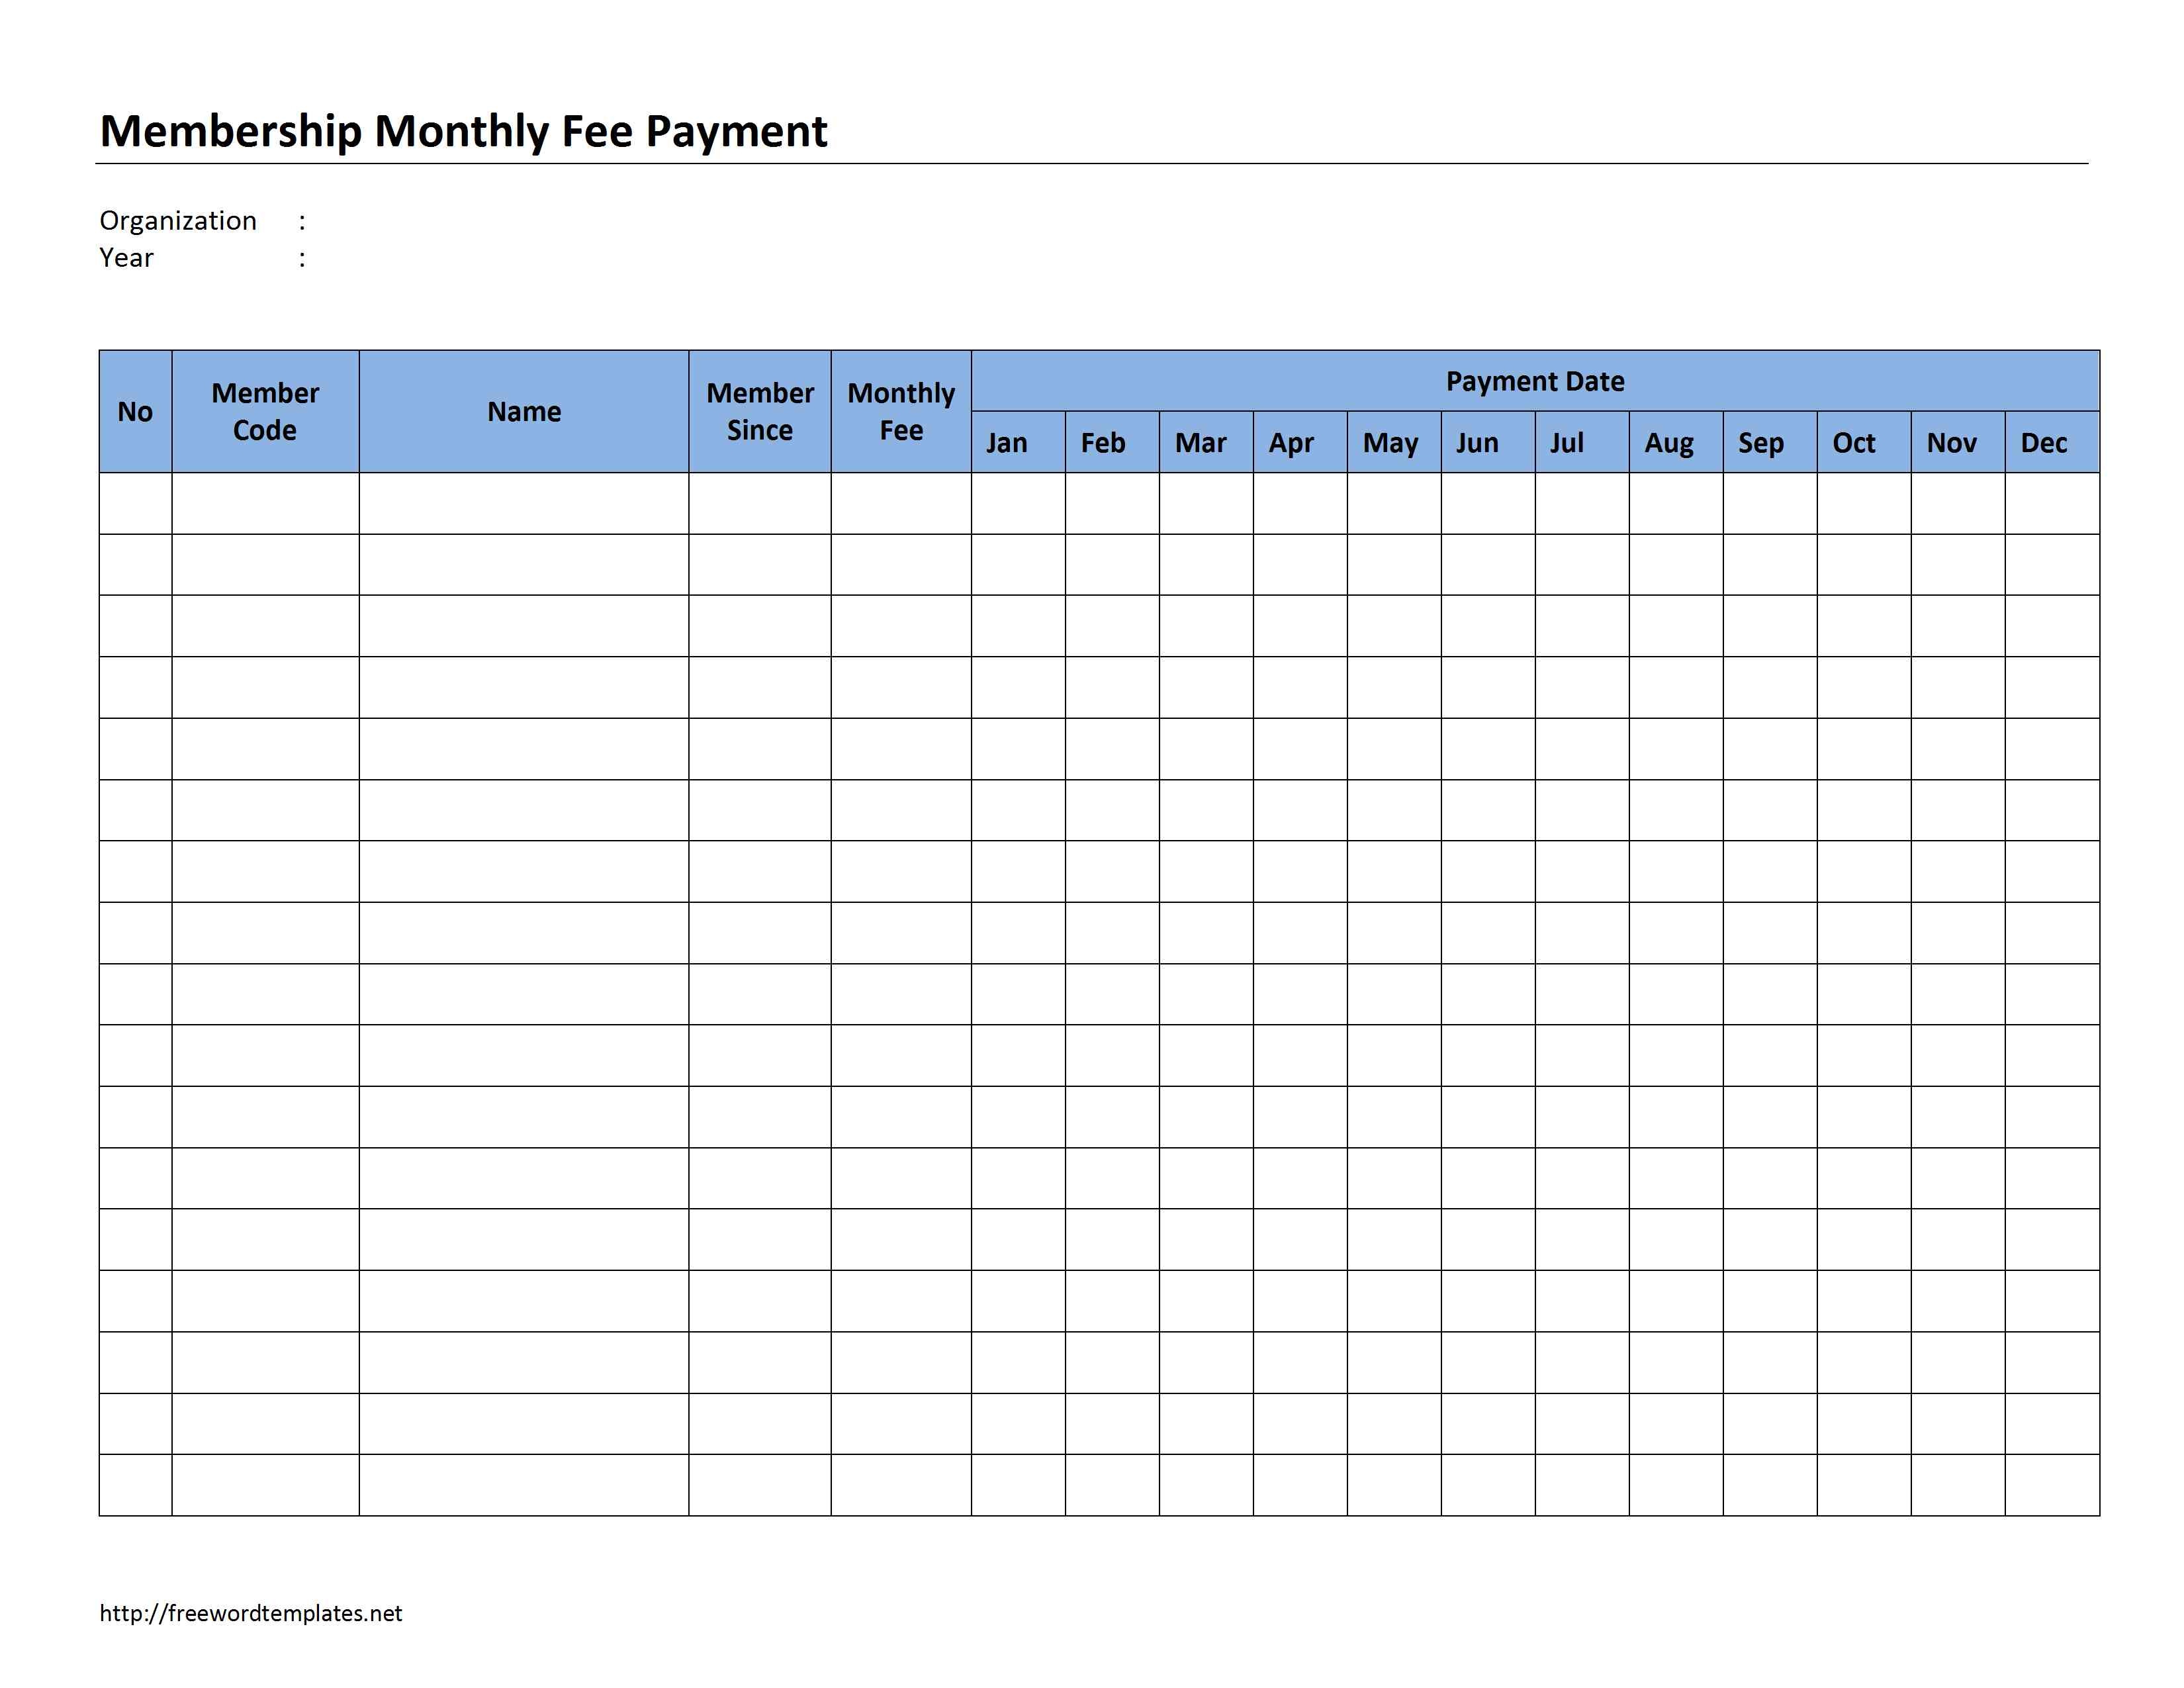 Schedule Template Payment Format Excel Sheet Sample Membership - Free Printable Bill Payment Schedule